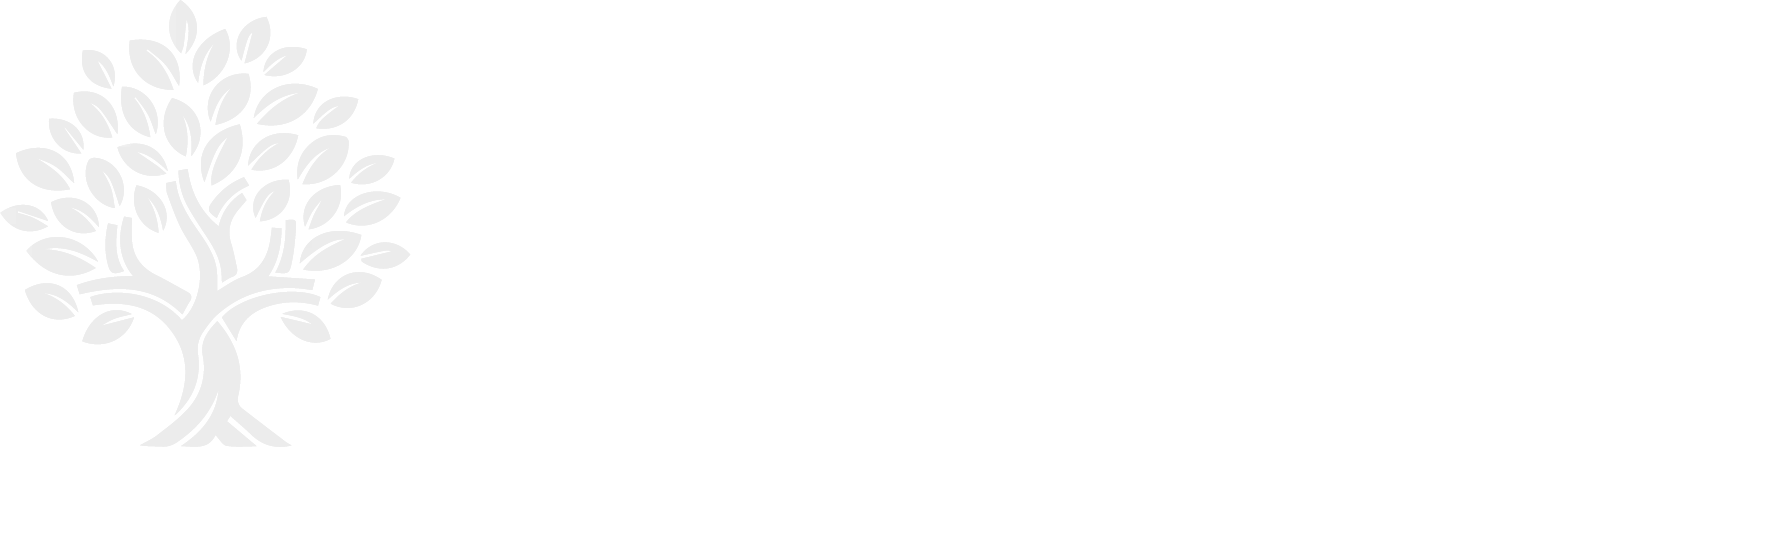 Murphys Tree Service Professional Tree Care Services Co Down